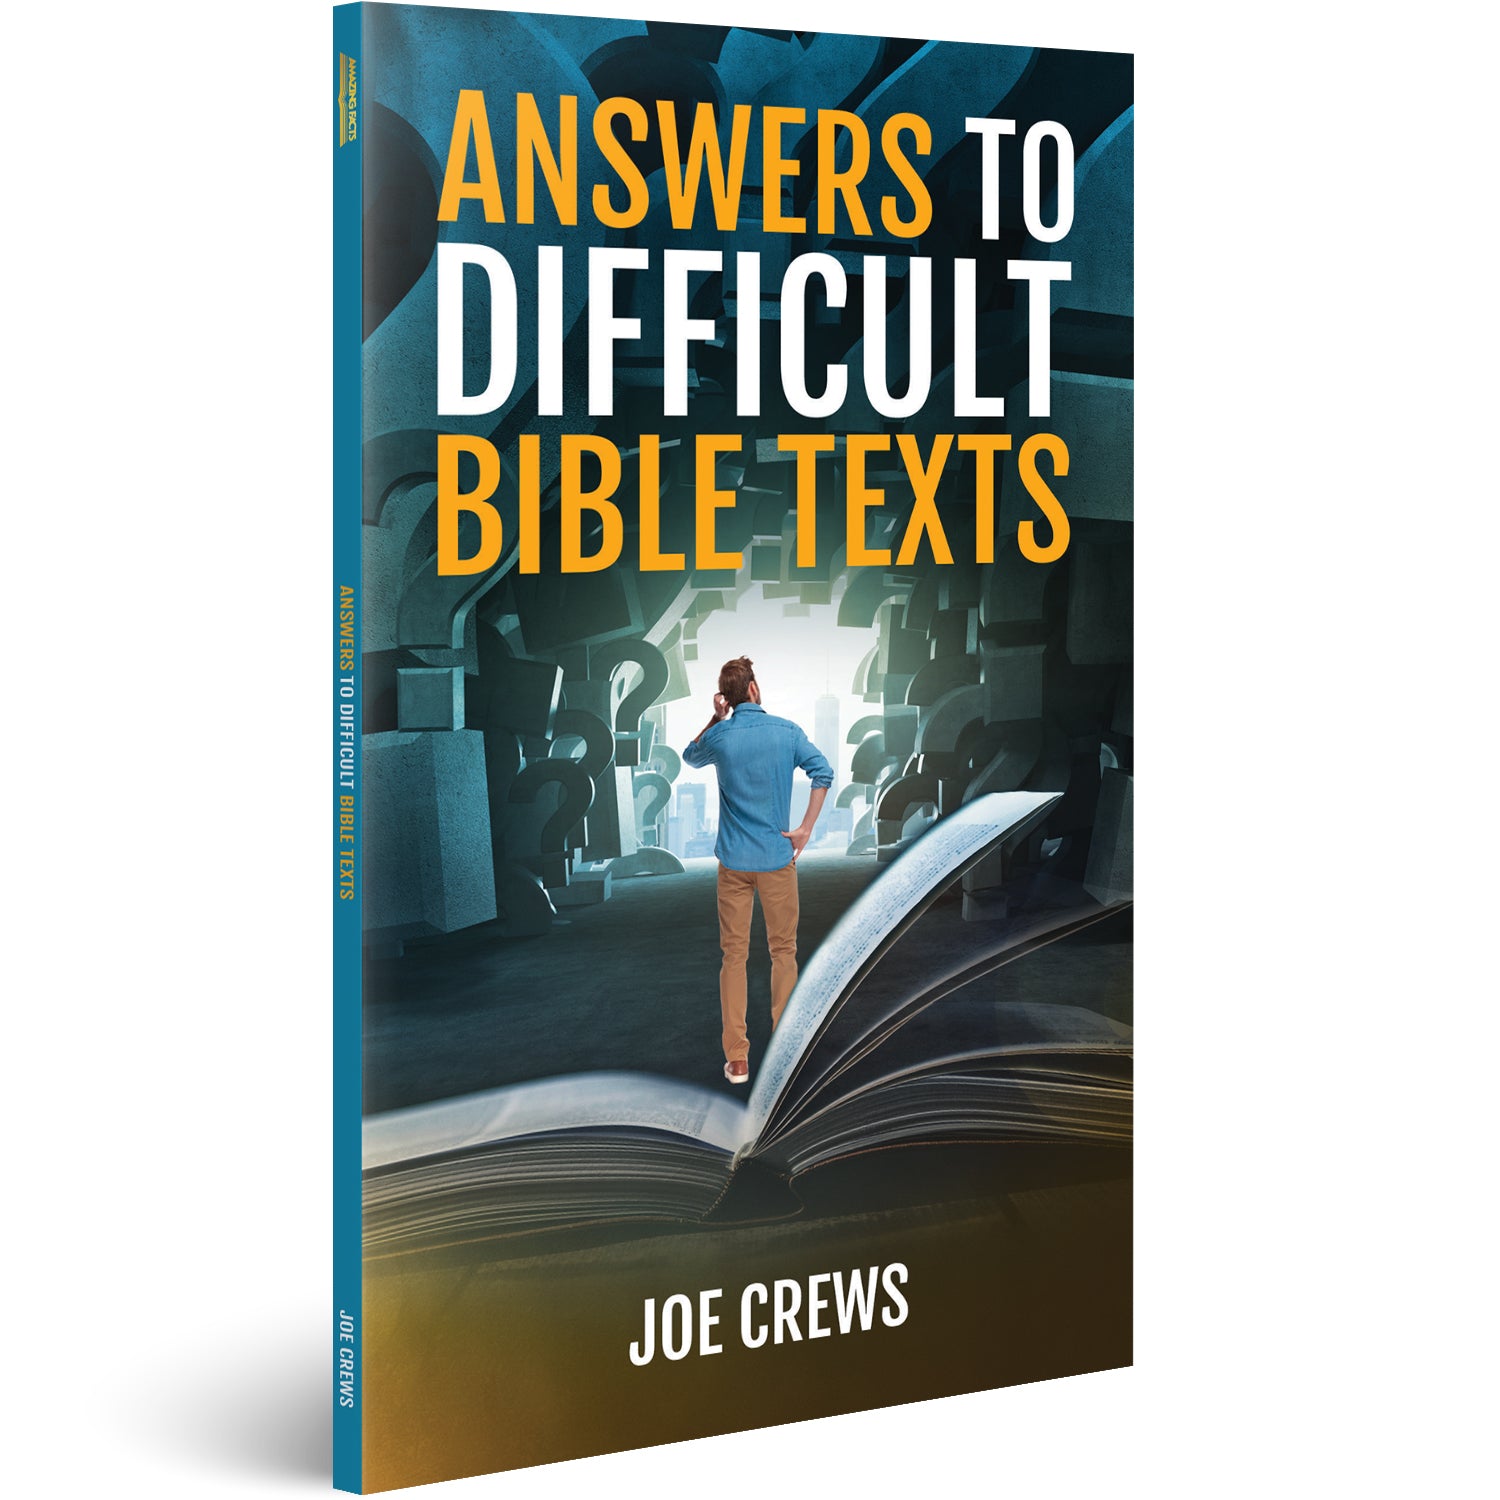 Answers to Difficult Bible Texts by Joe Crews